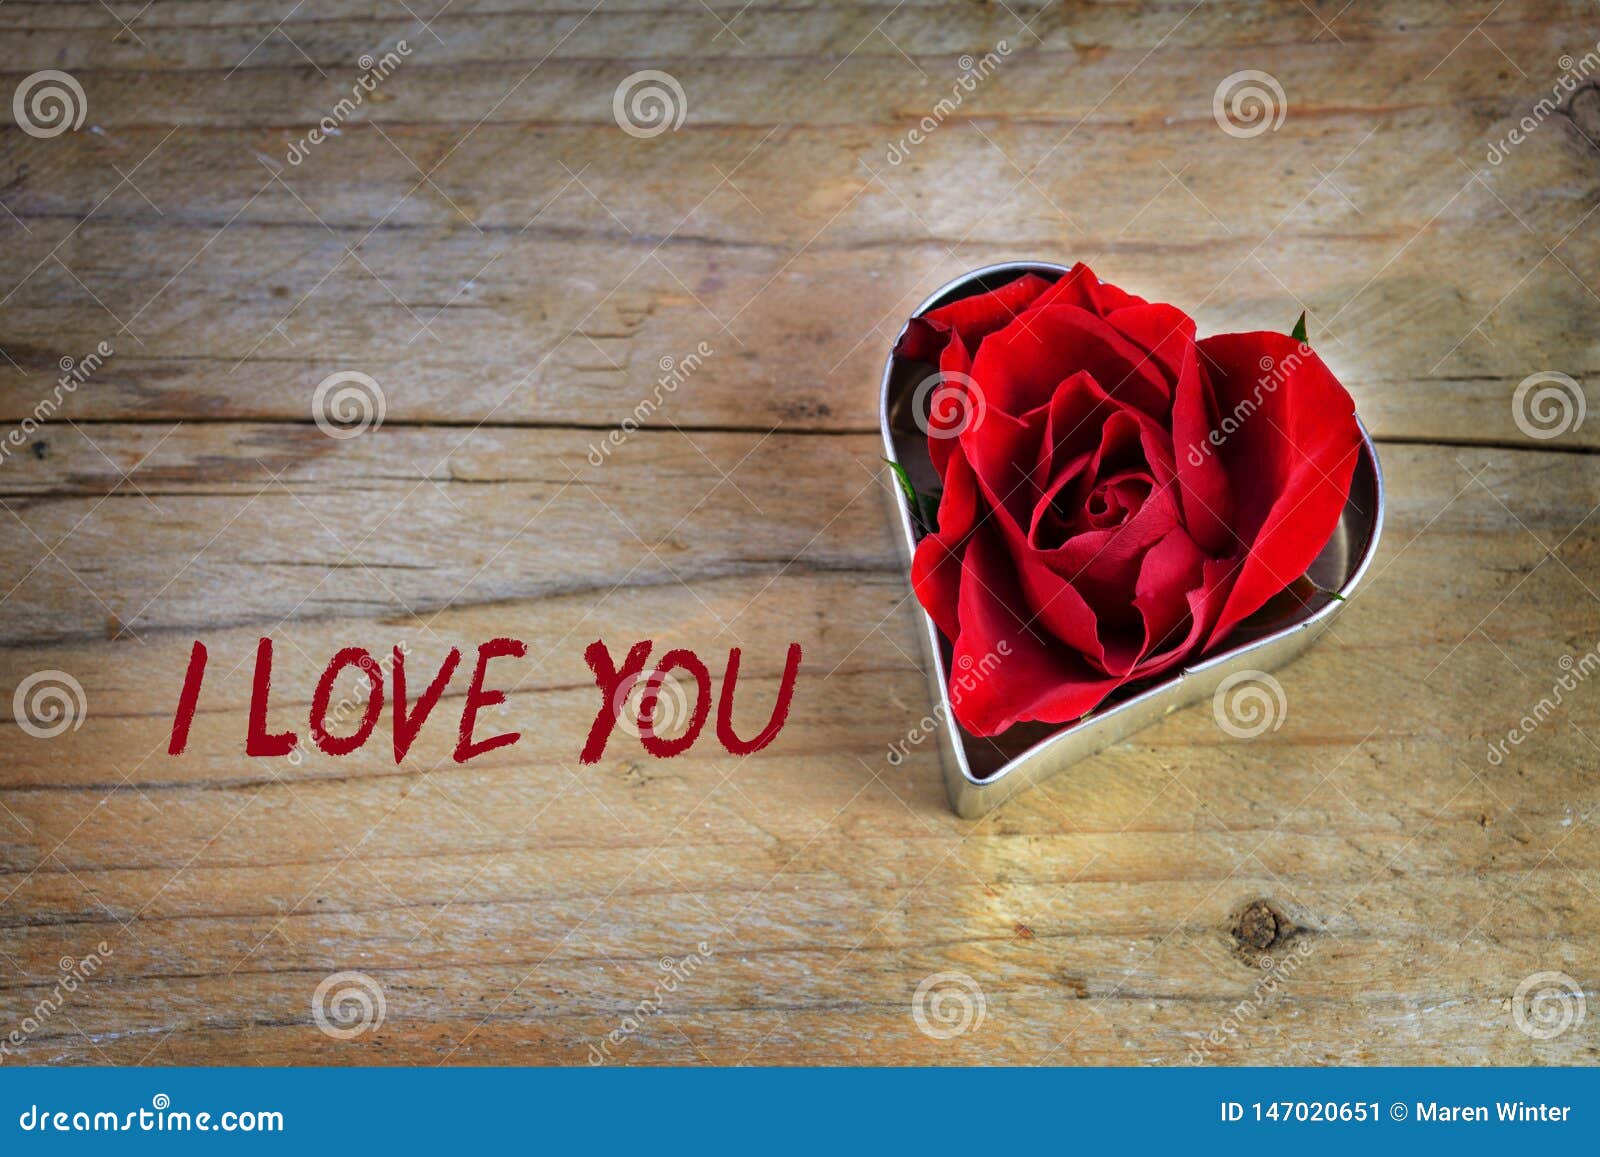 828 I Love You Red Heart Rose Stock Photos - Free & Royalty-Free ...